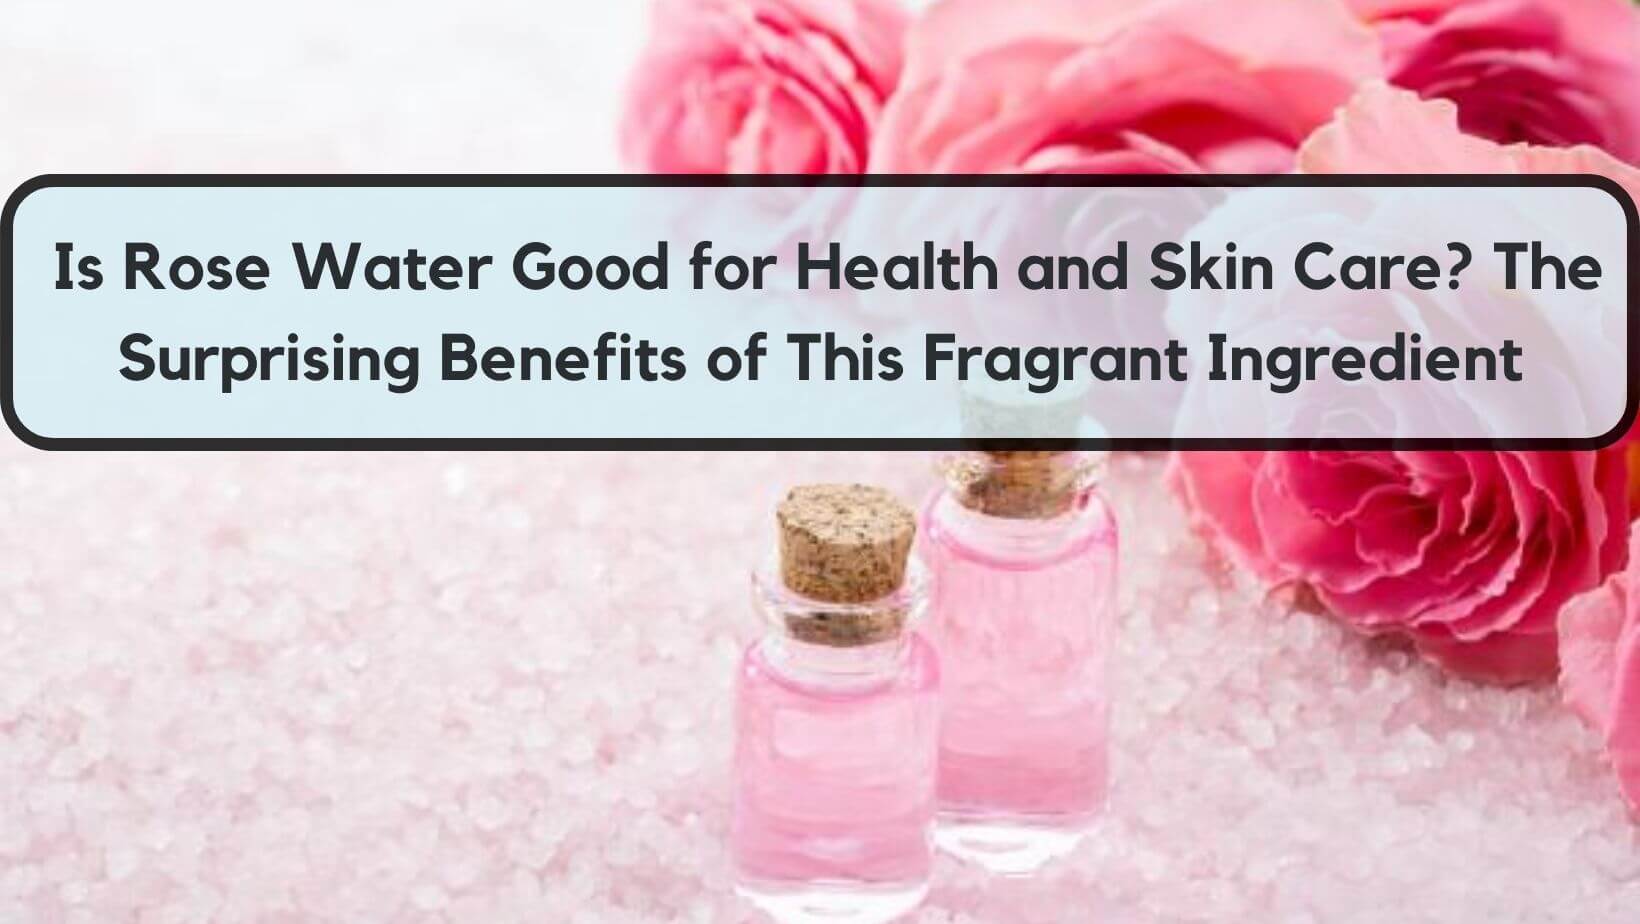 Is Rose Water Good for Health and Skin Care?